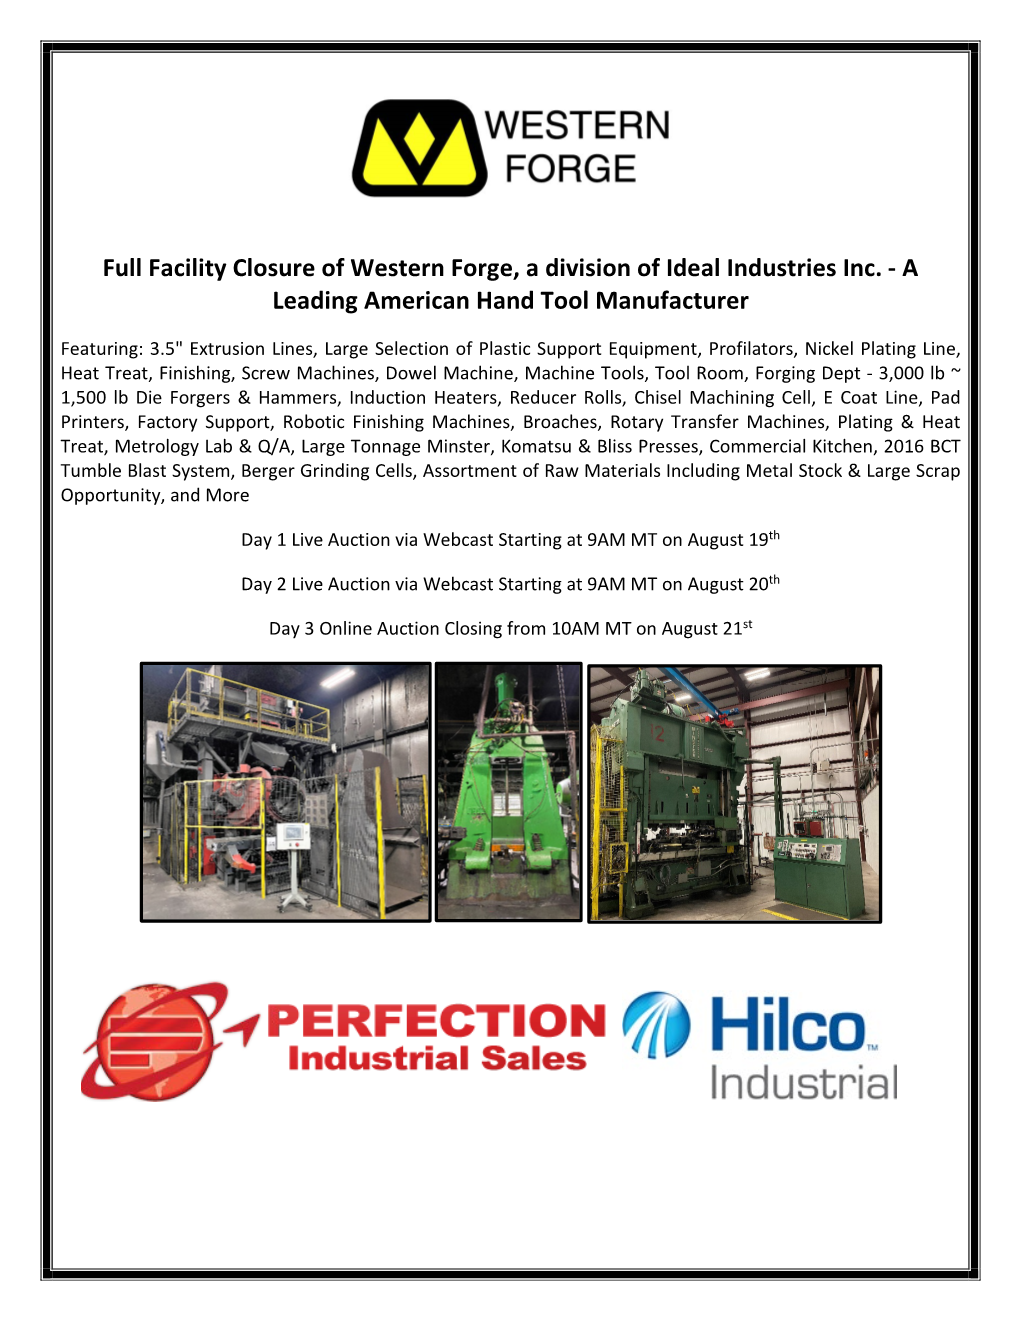 Full Facility Closure of Western Forge, a Division of Ideal Industries Inc